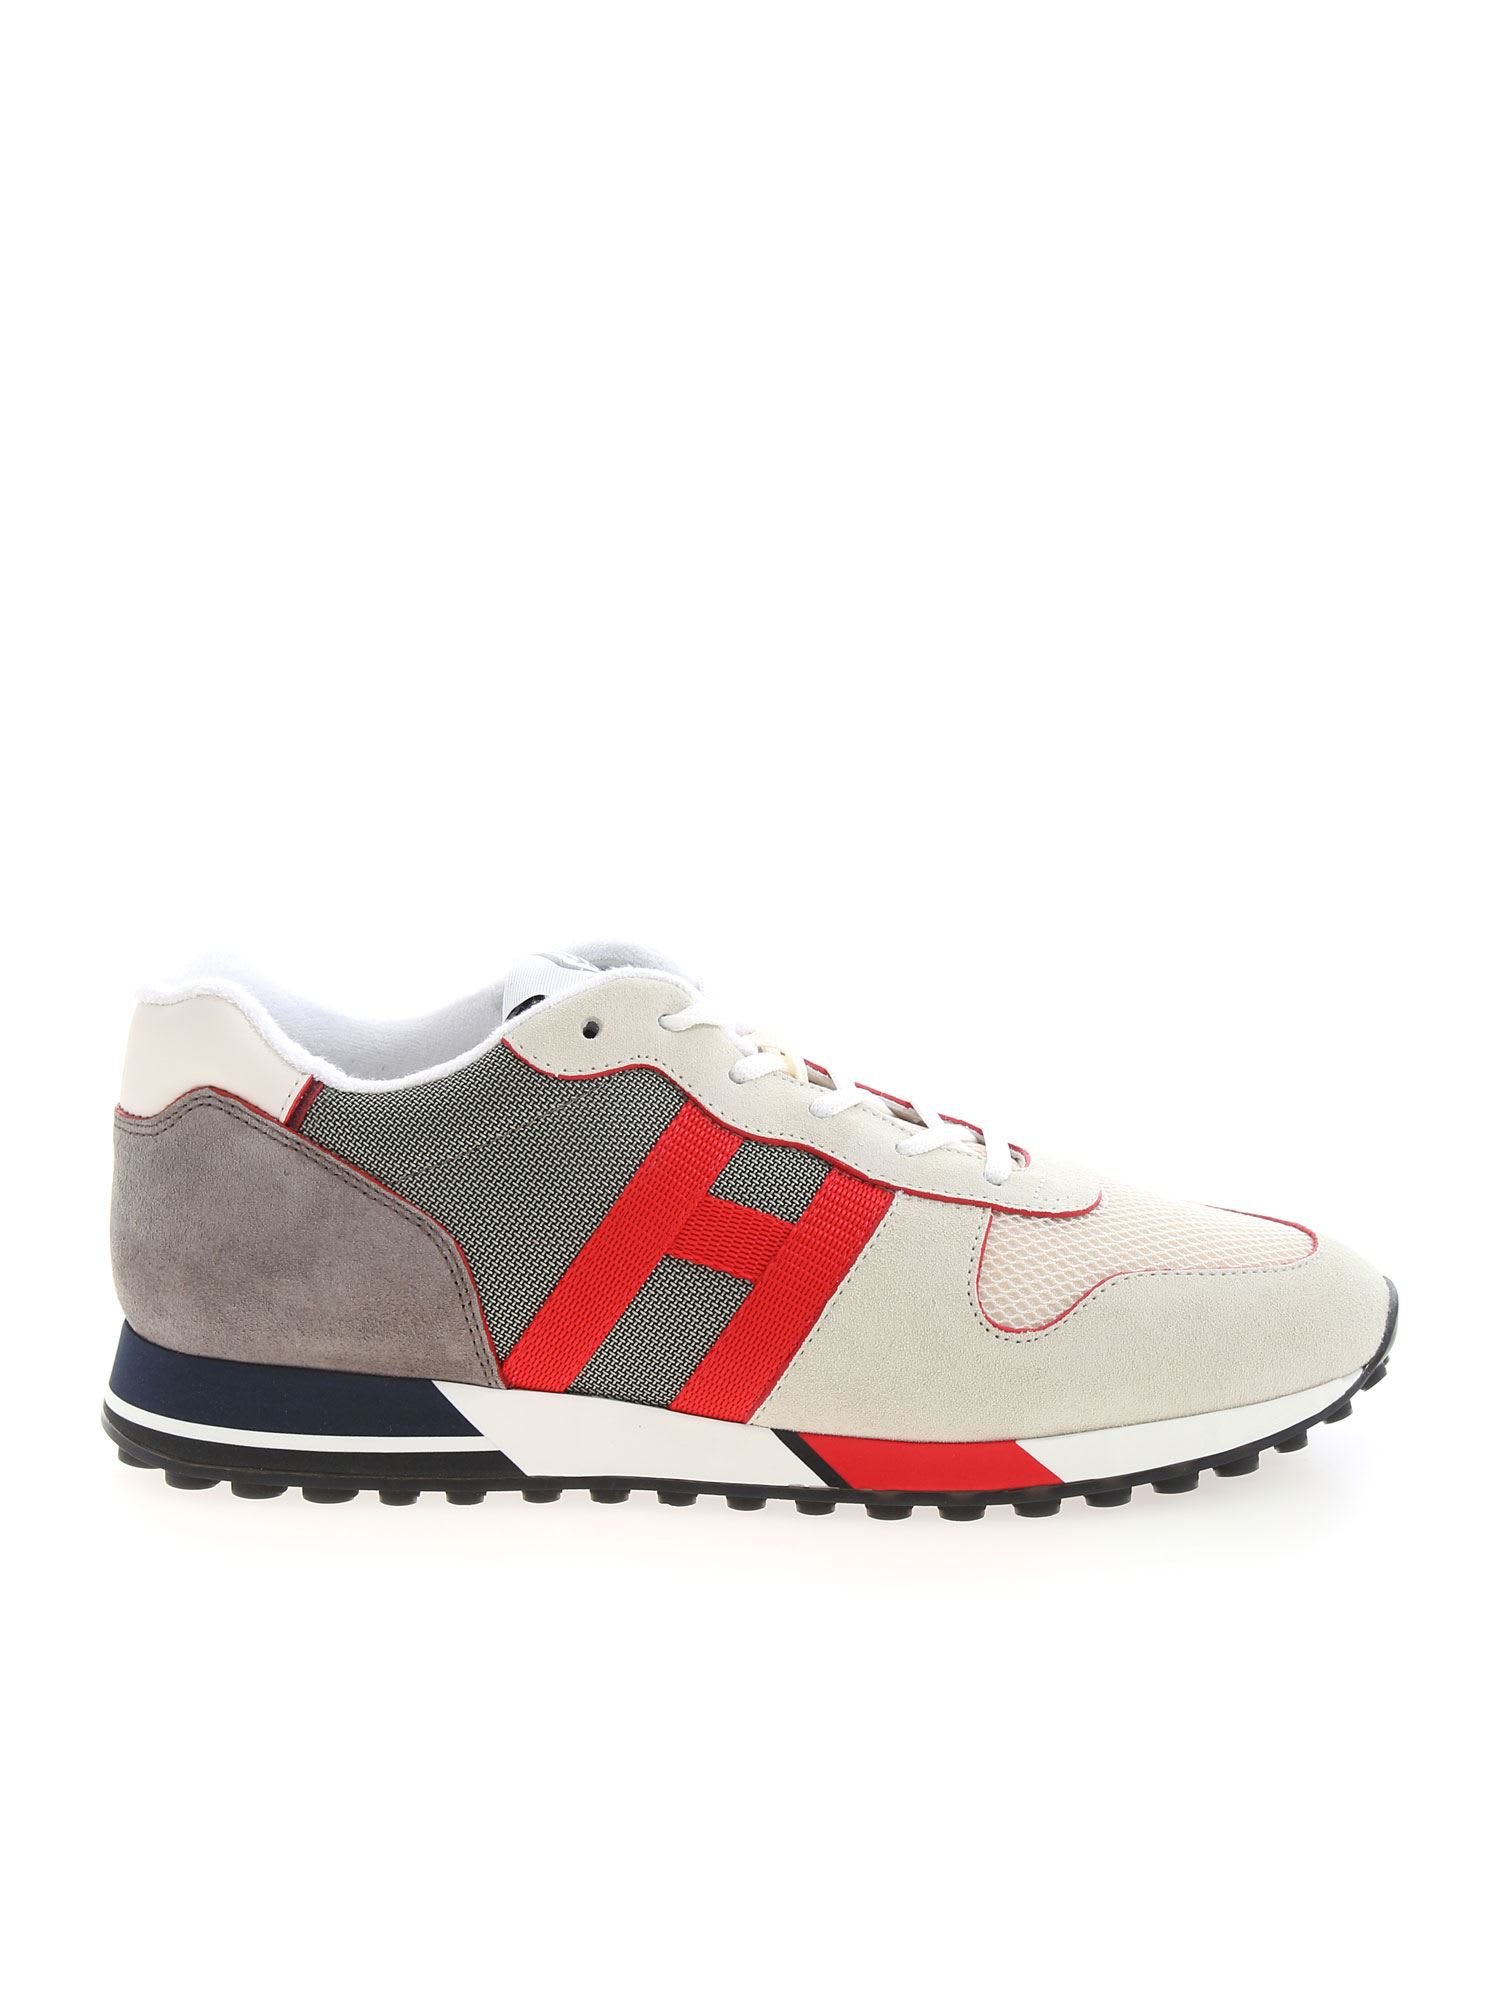 Hogan H383 Gray And Red Sneakers